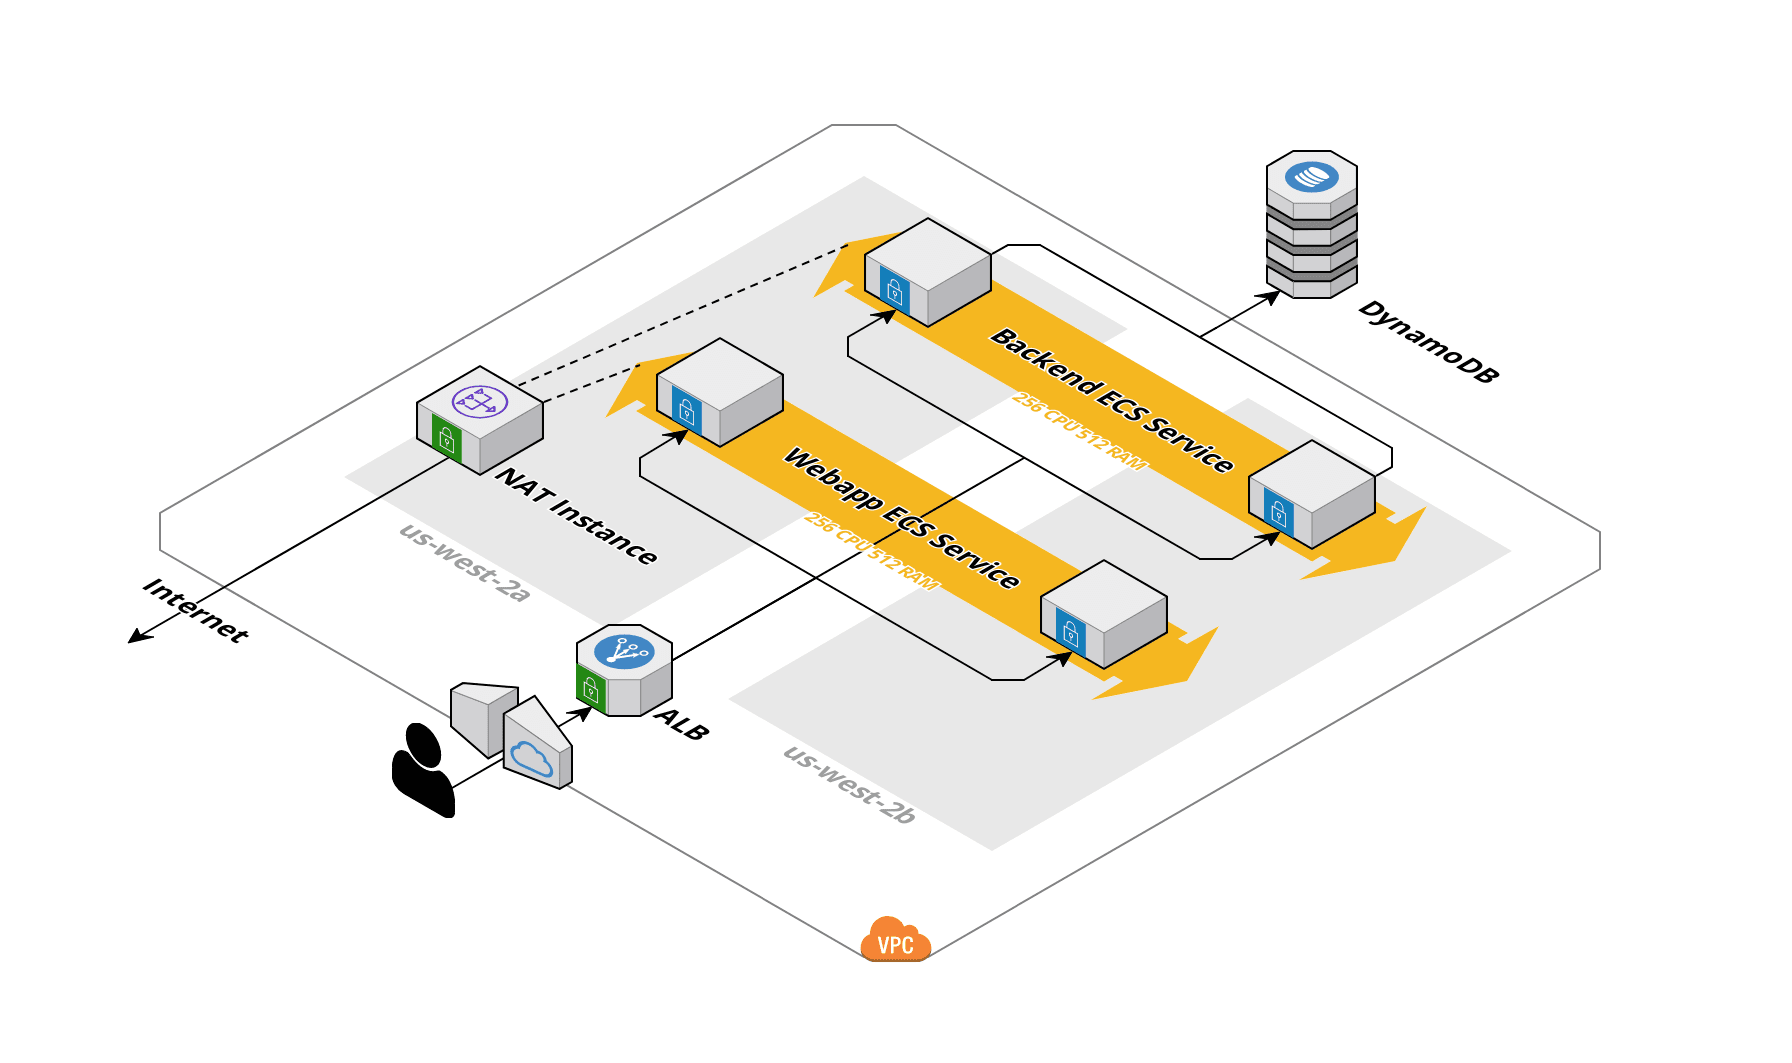 aws-arch-diagram.png